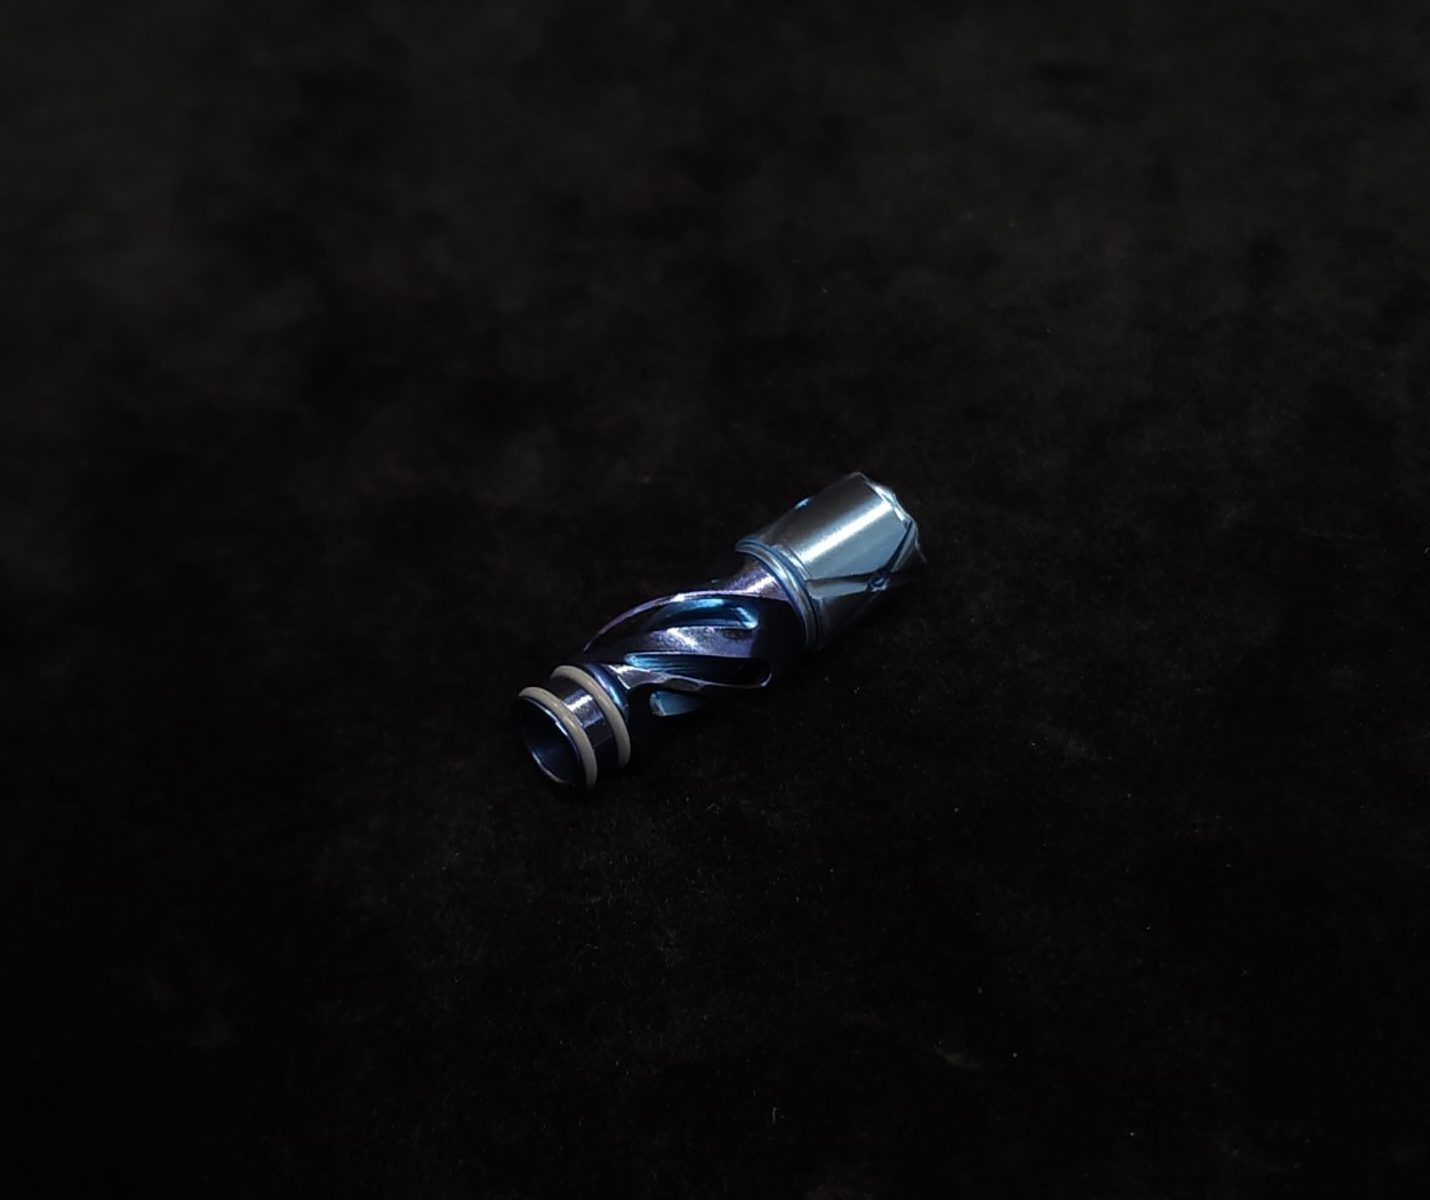 This image portrays Titanium Tip: HELIX-Cobalt Blue Anodized by Dovetail Woodwork.